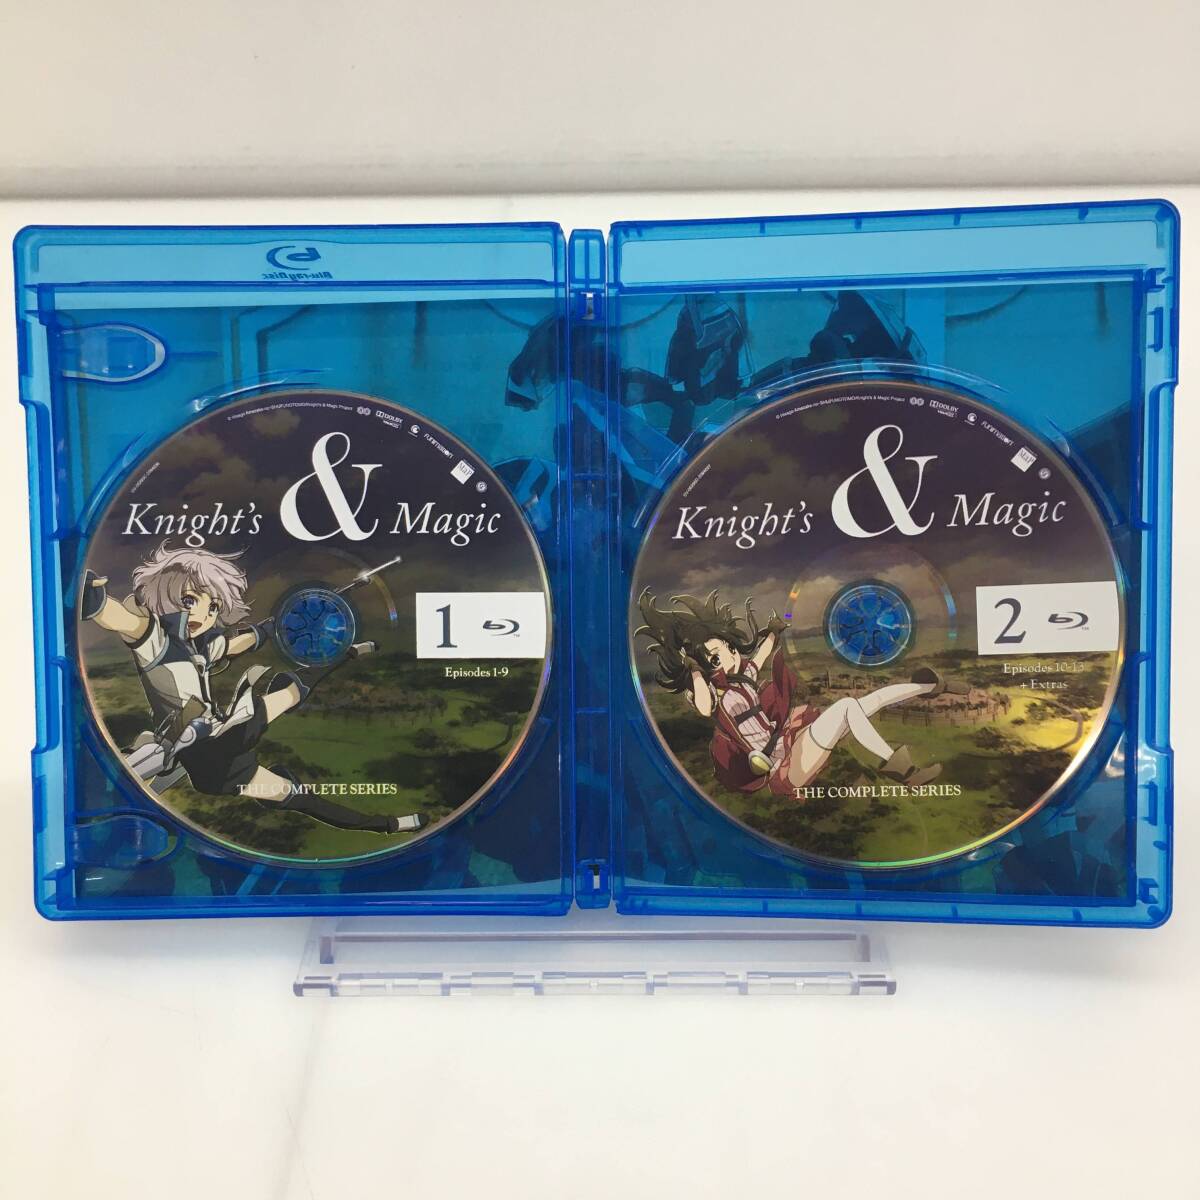 C5208 ★1円～【Blu-ray Disc】 Knight's ＆ Magic THE COMPLETE SERIES 中古品 ◎コンパクト発送◎の画像4